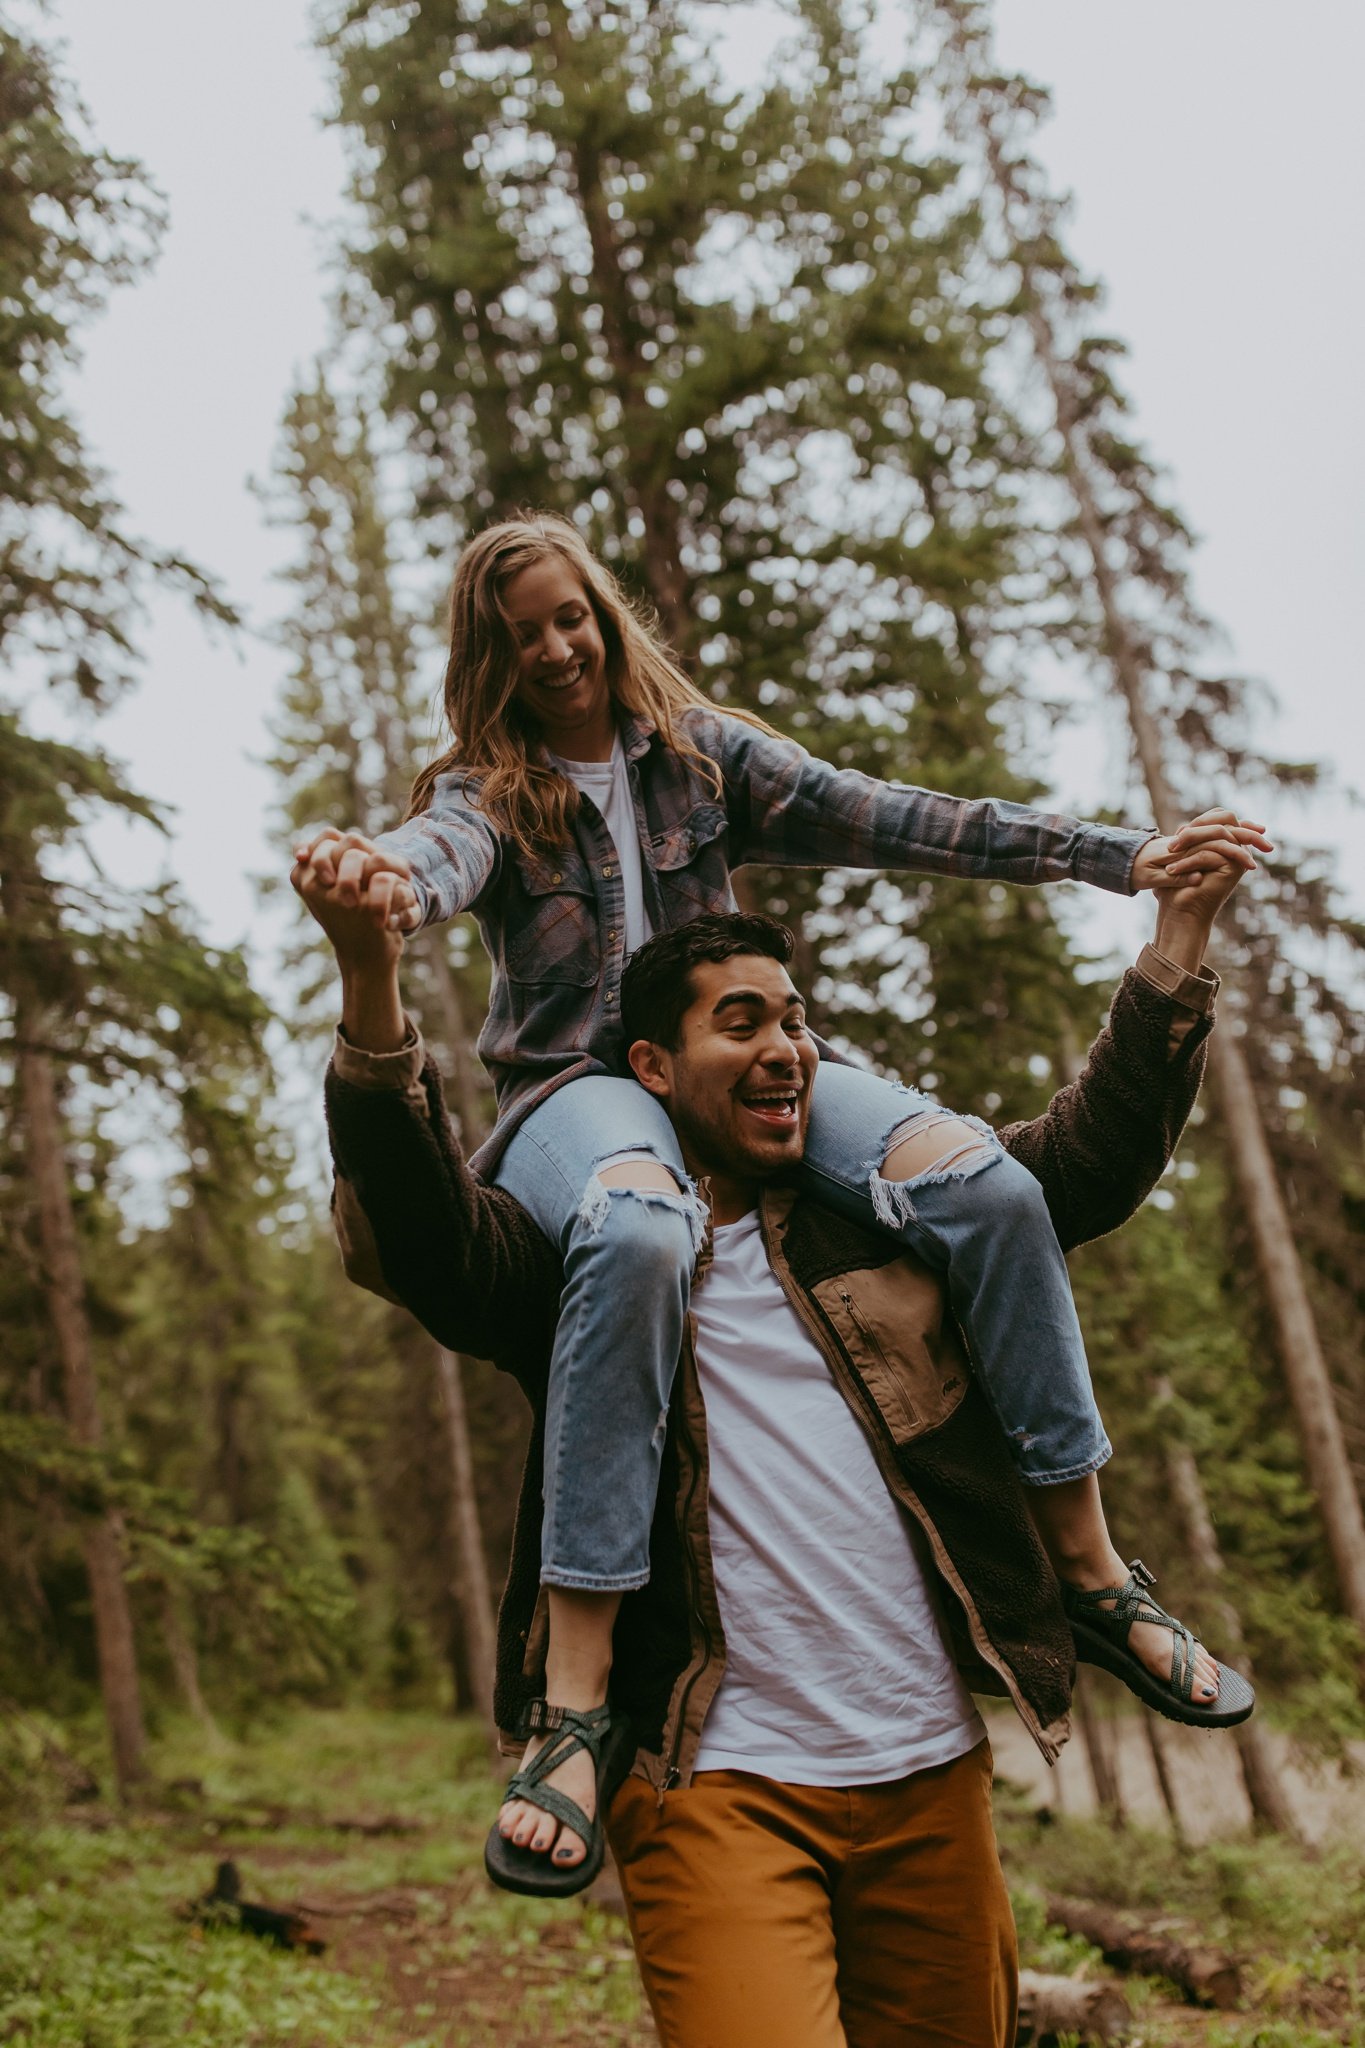 Camping Engagement Session in Breckenridge, Colorado